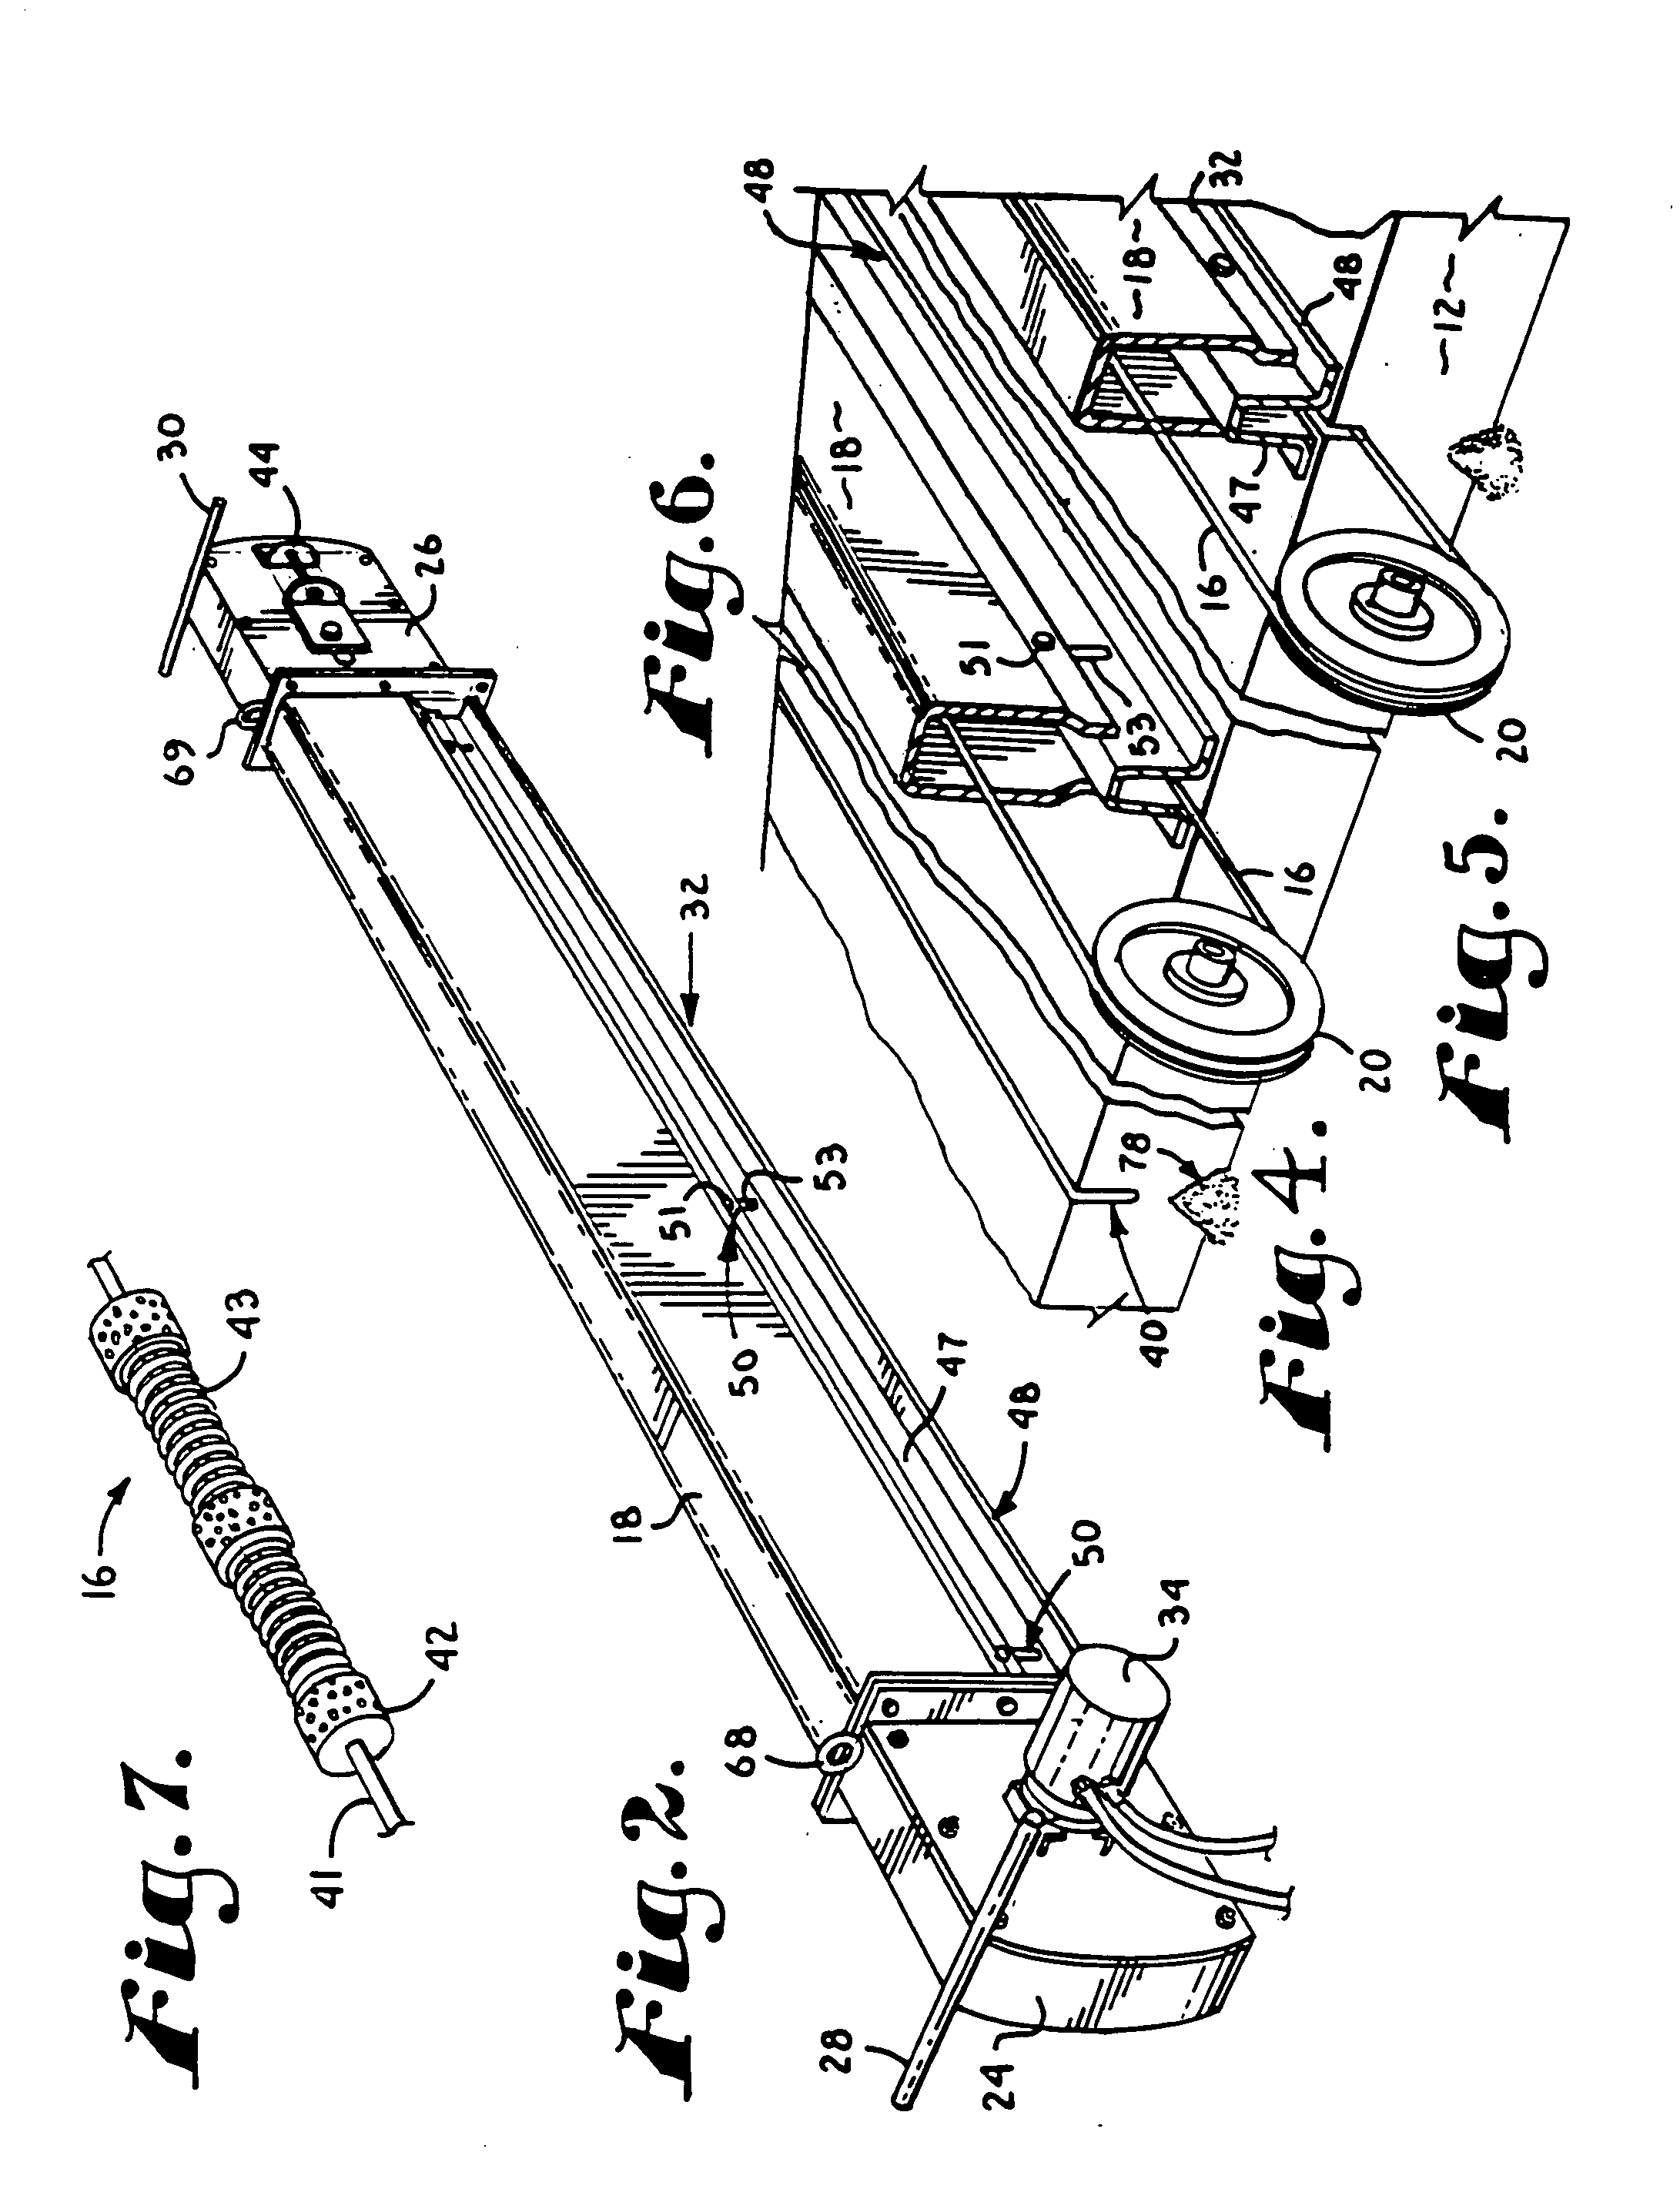 Apparatus for cutting concrete using abrasive cable